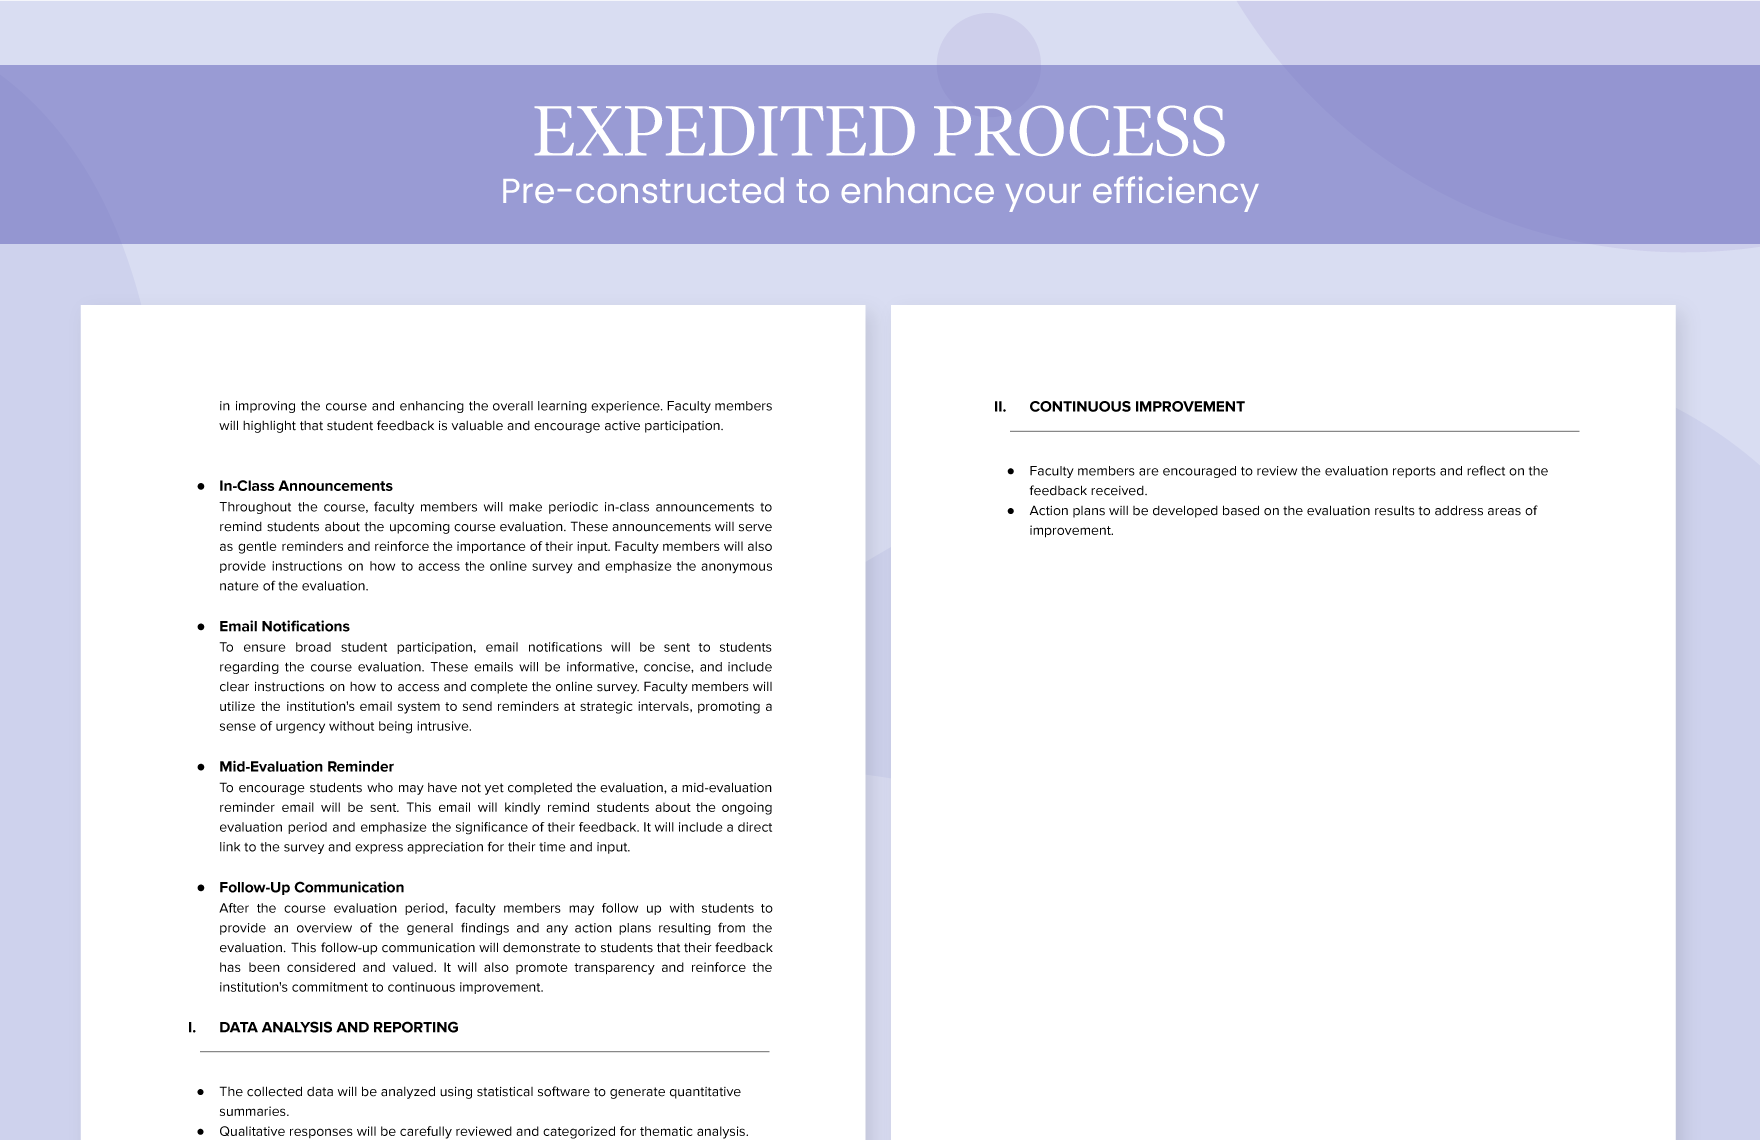 Education Course Evaluation Data Collection Plan Template